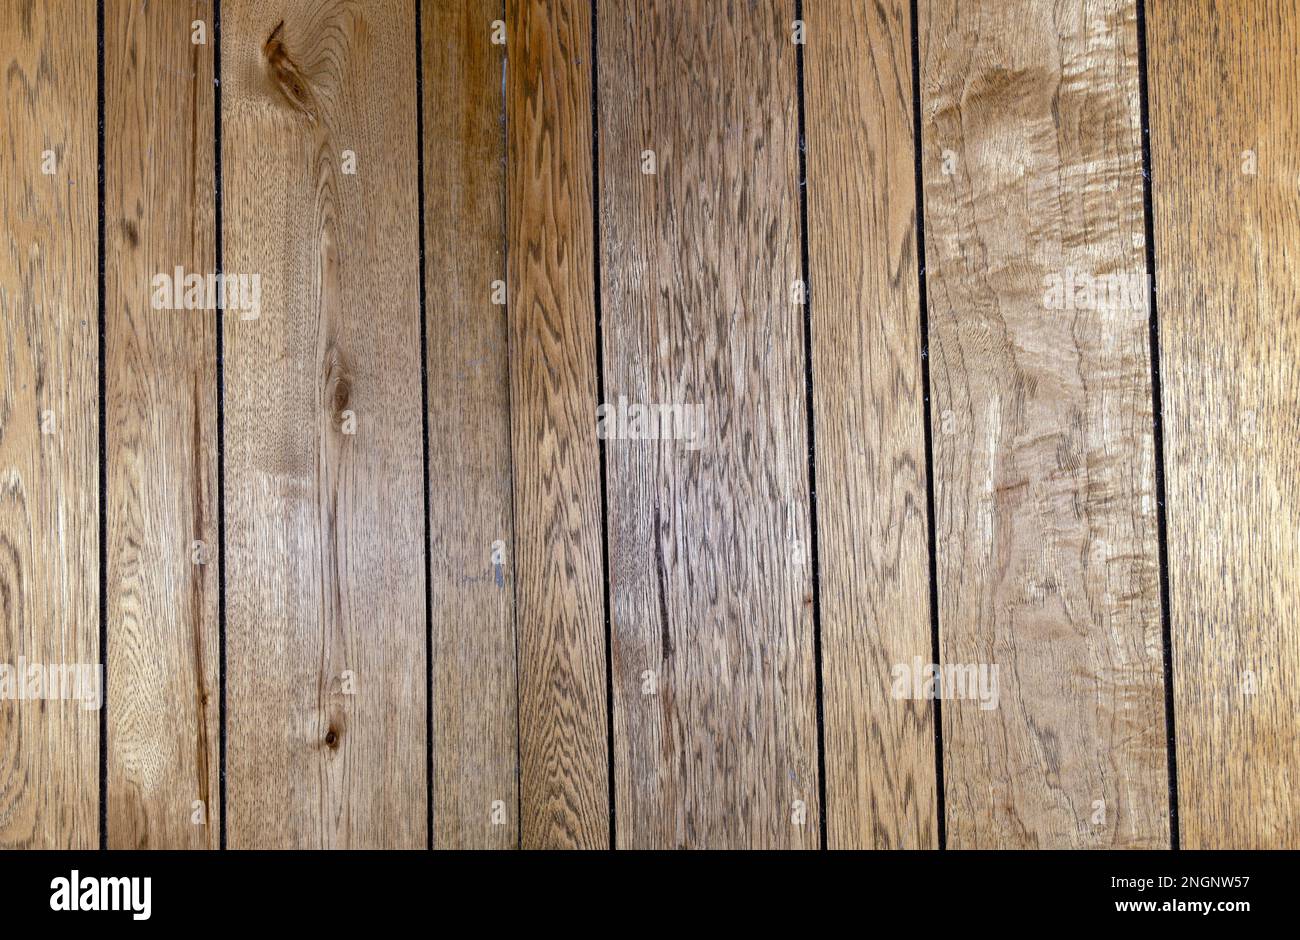 Brown paneling with wood grain and straight lines makes a nice background or texture and offers copy space. A nice rustic flair. Stock Photo